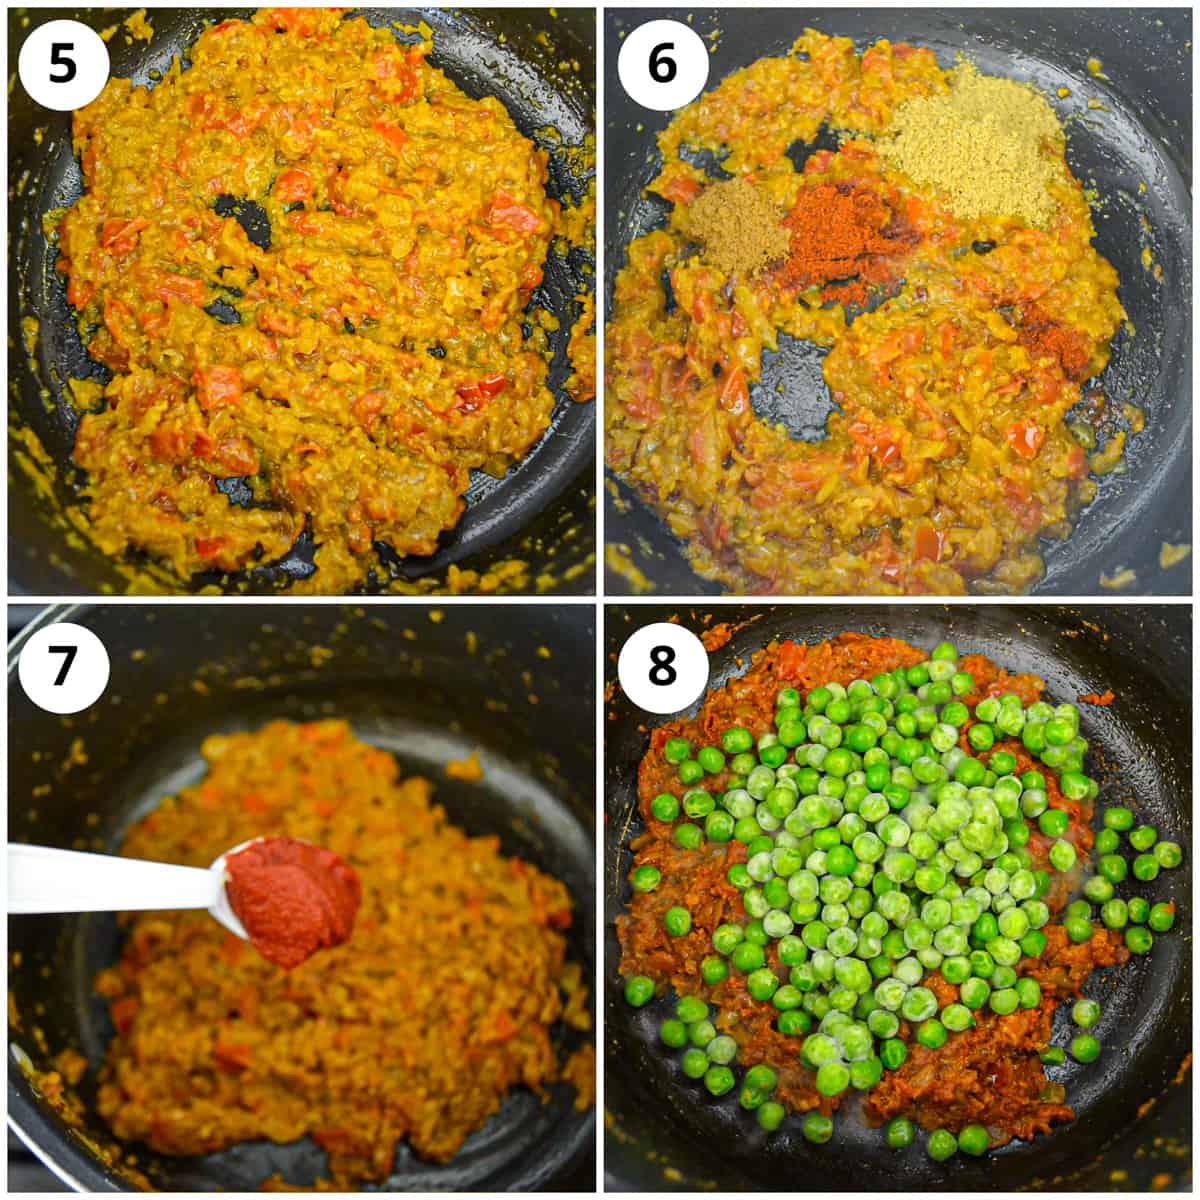 Cooking the curry with the spices and adding the peas